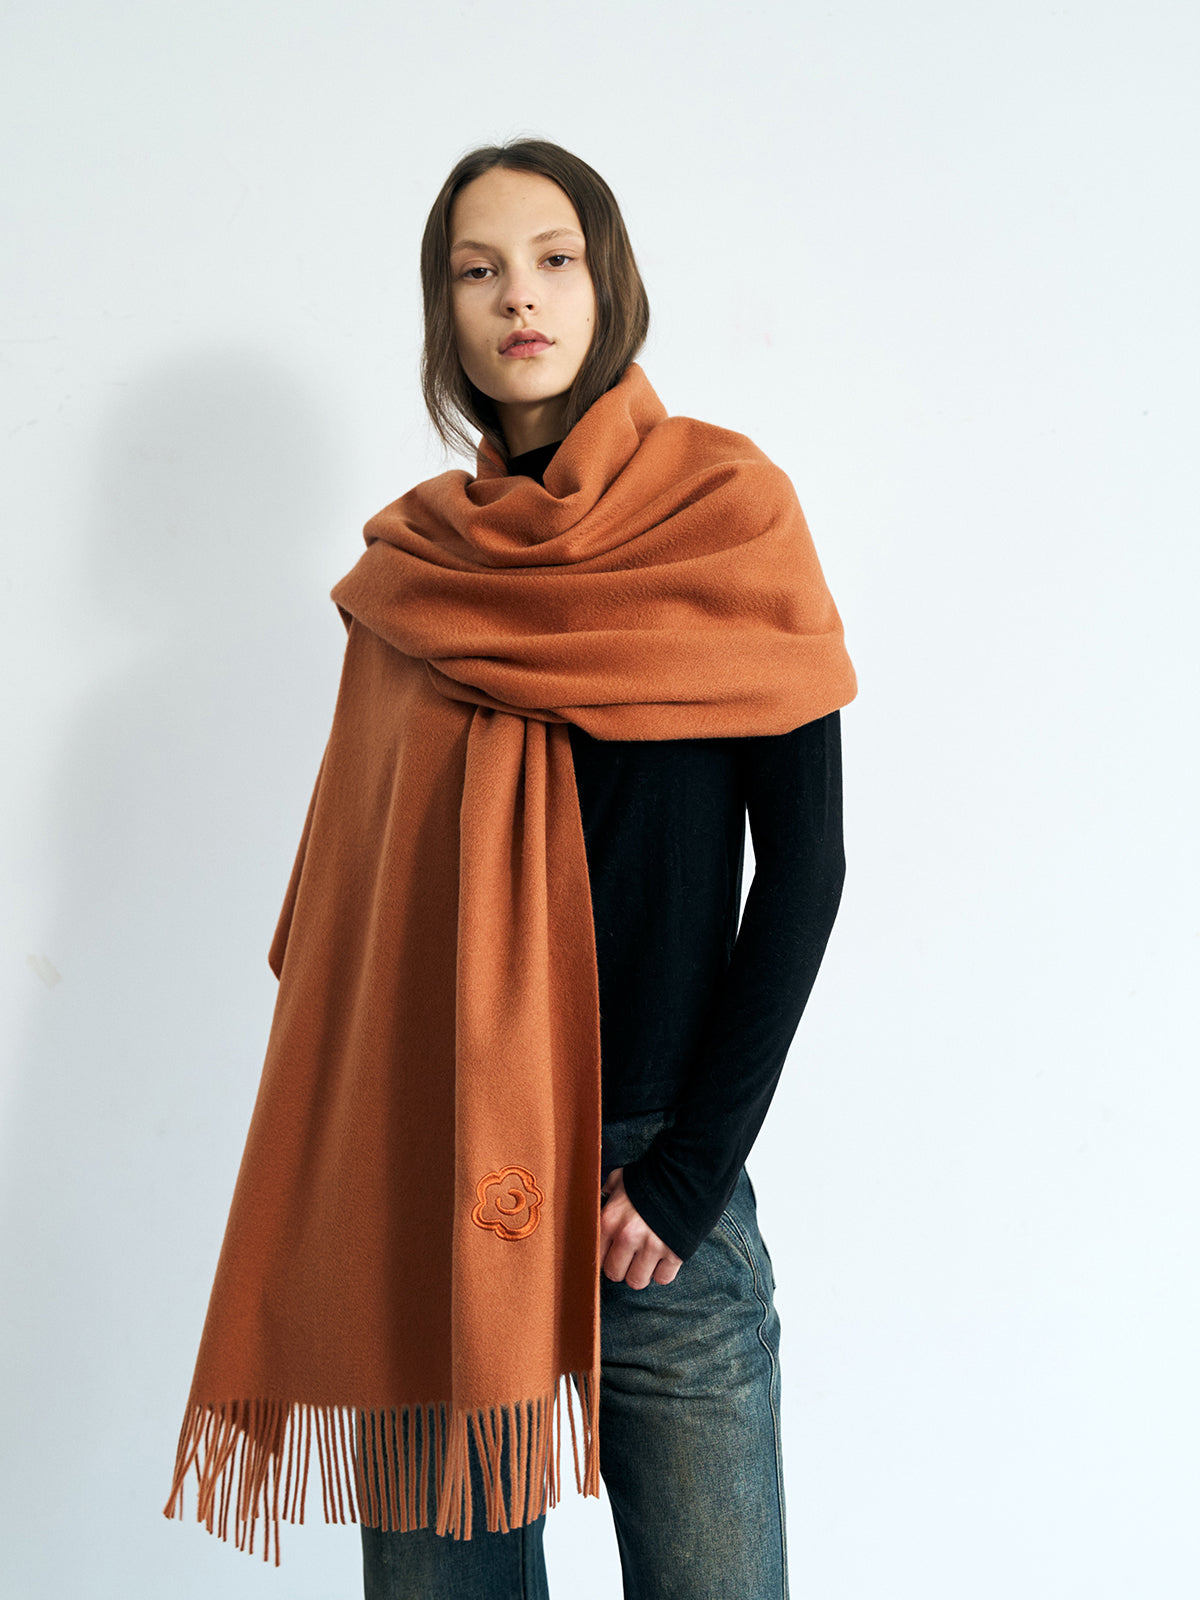 Brown Cashmere Scarf/Shawl Stole: 70 x 200 Cms